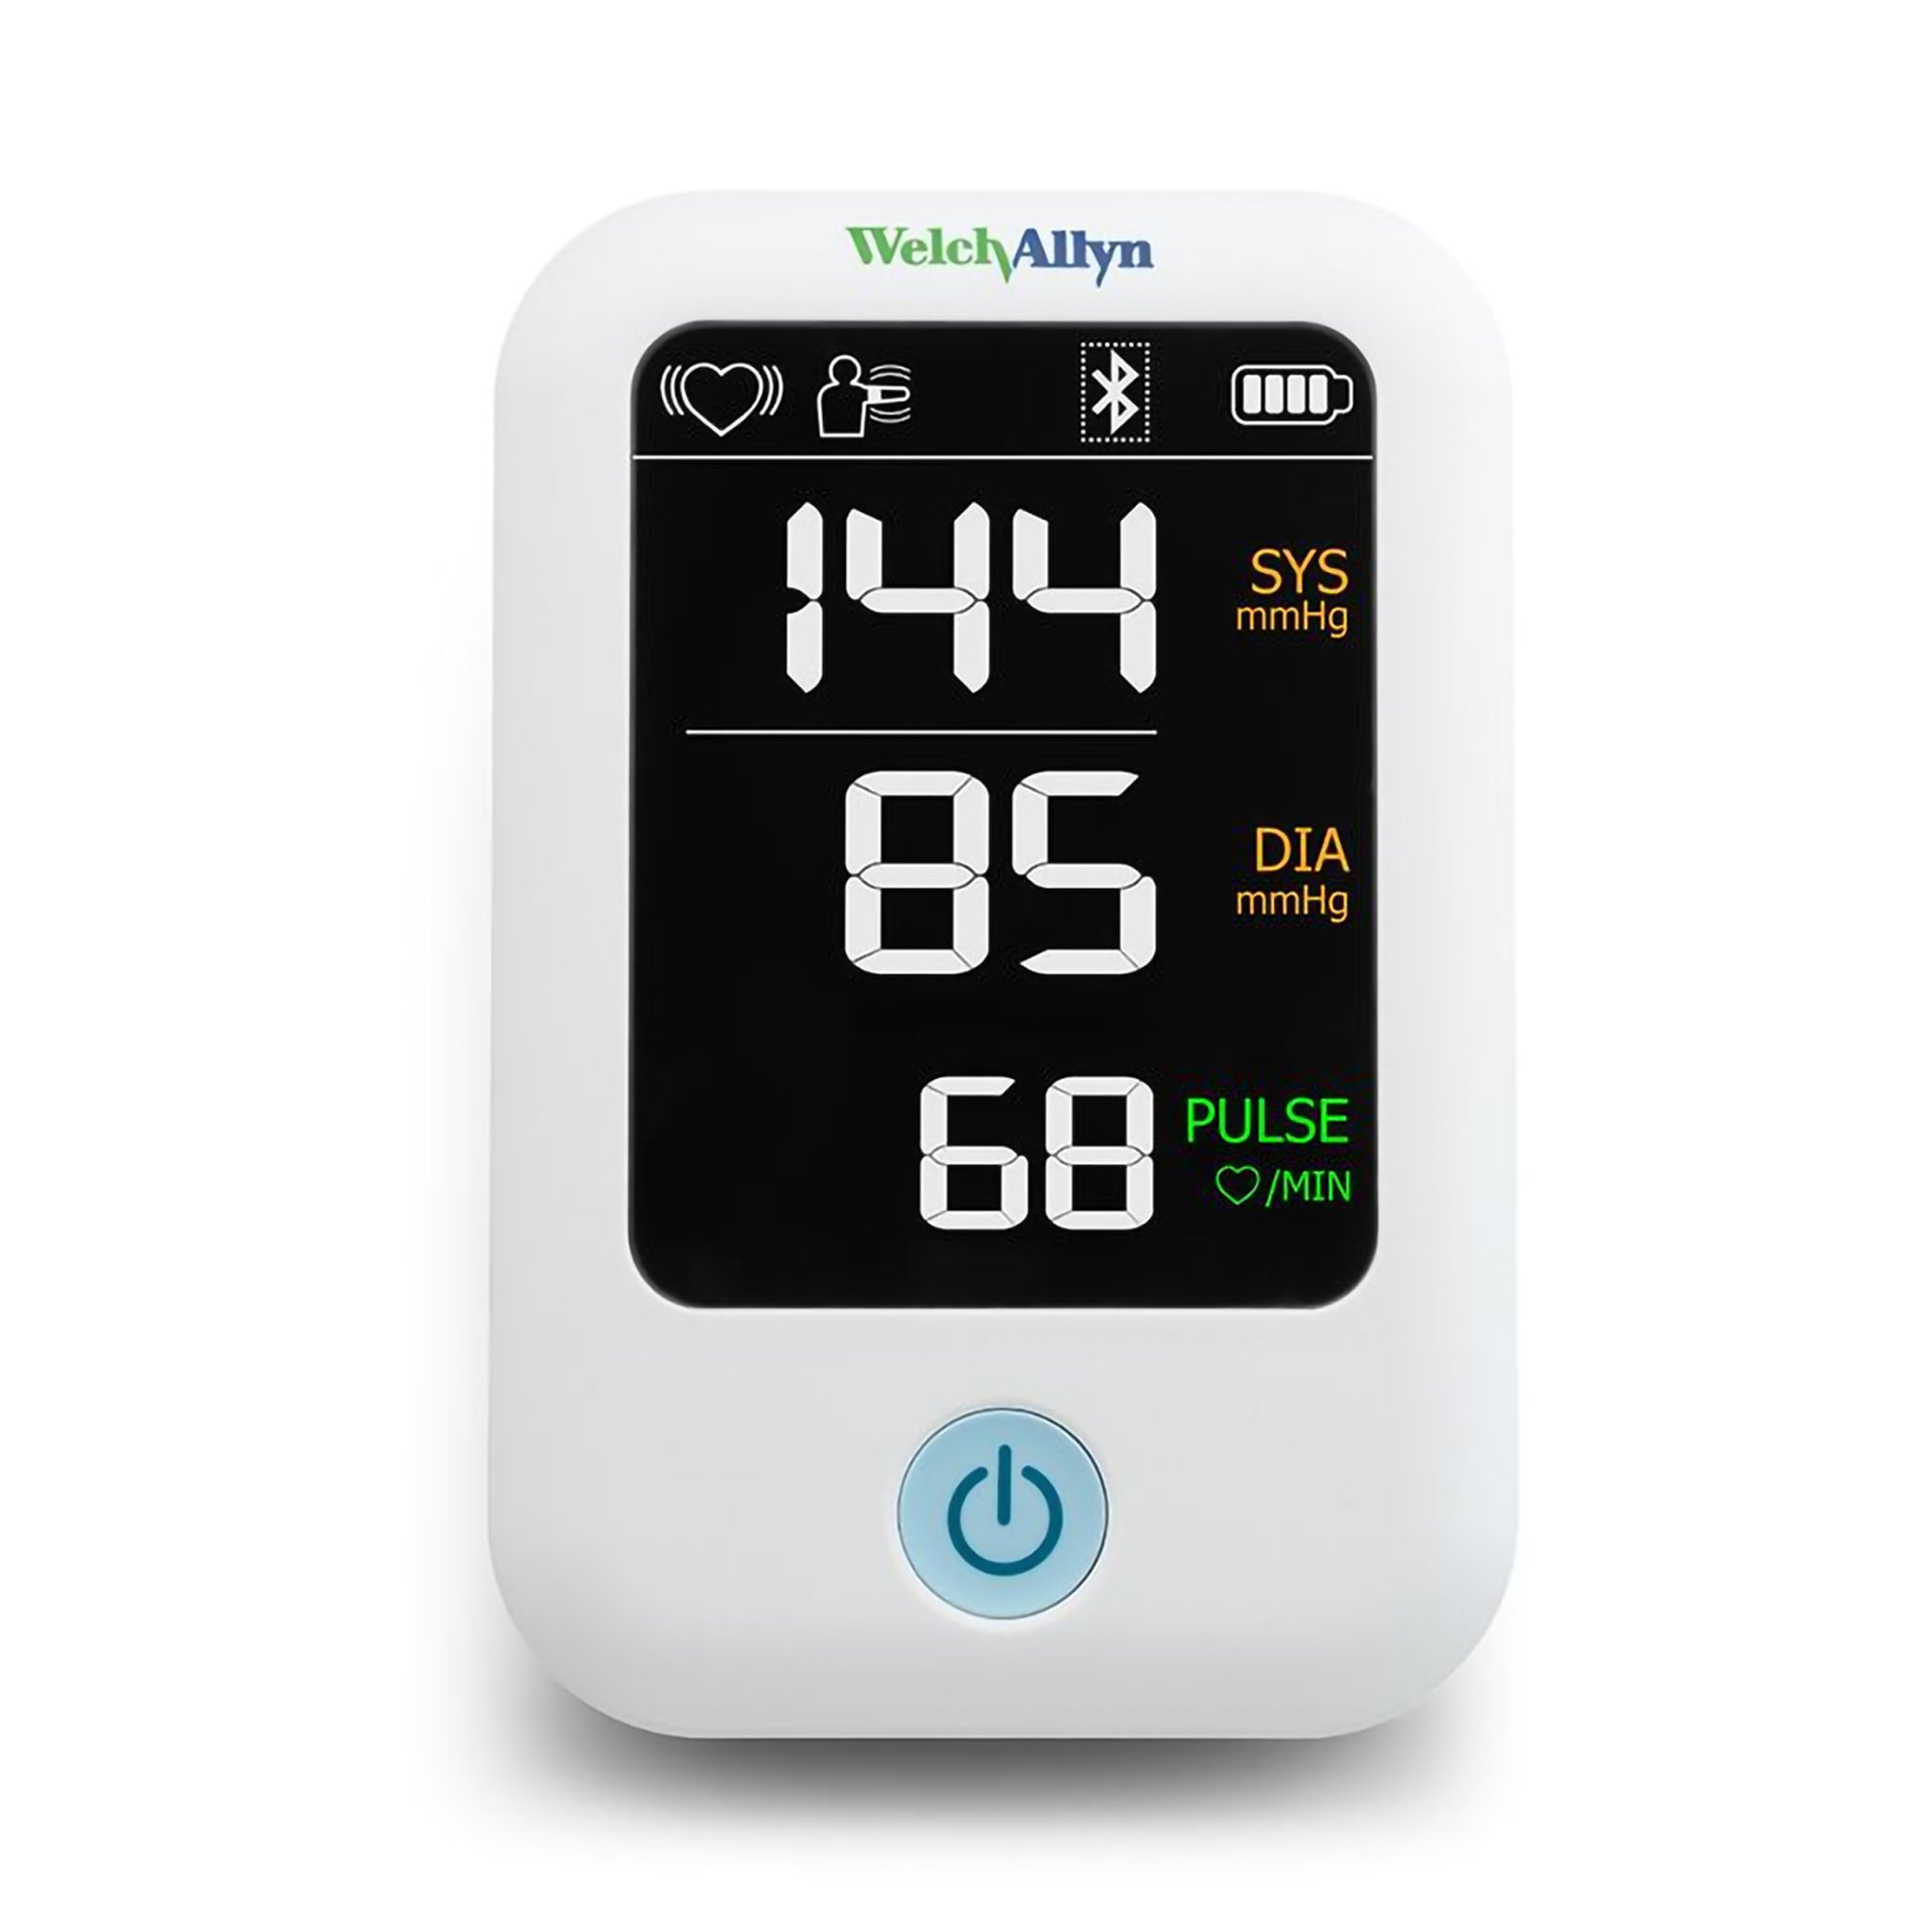 Welch Allyn Home Blood Pressure Monitor with SureBP (1700 Series